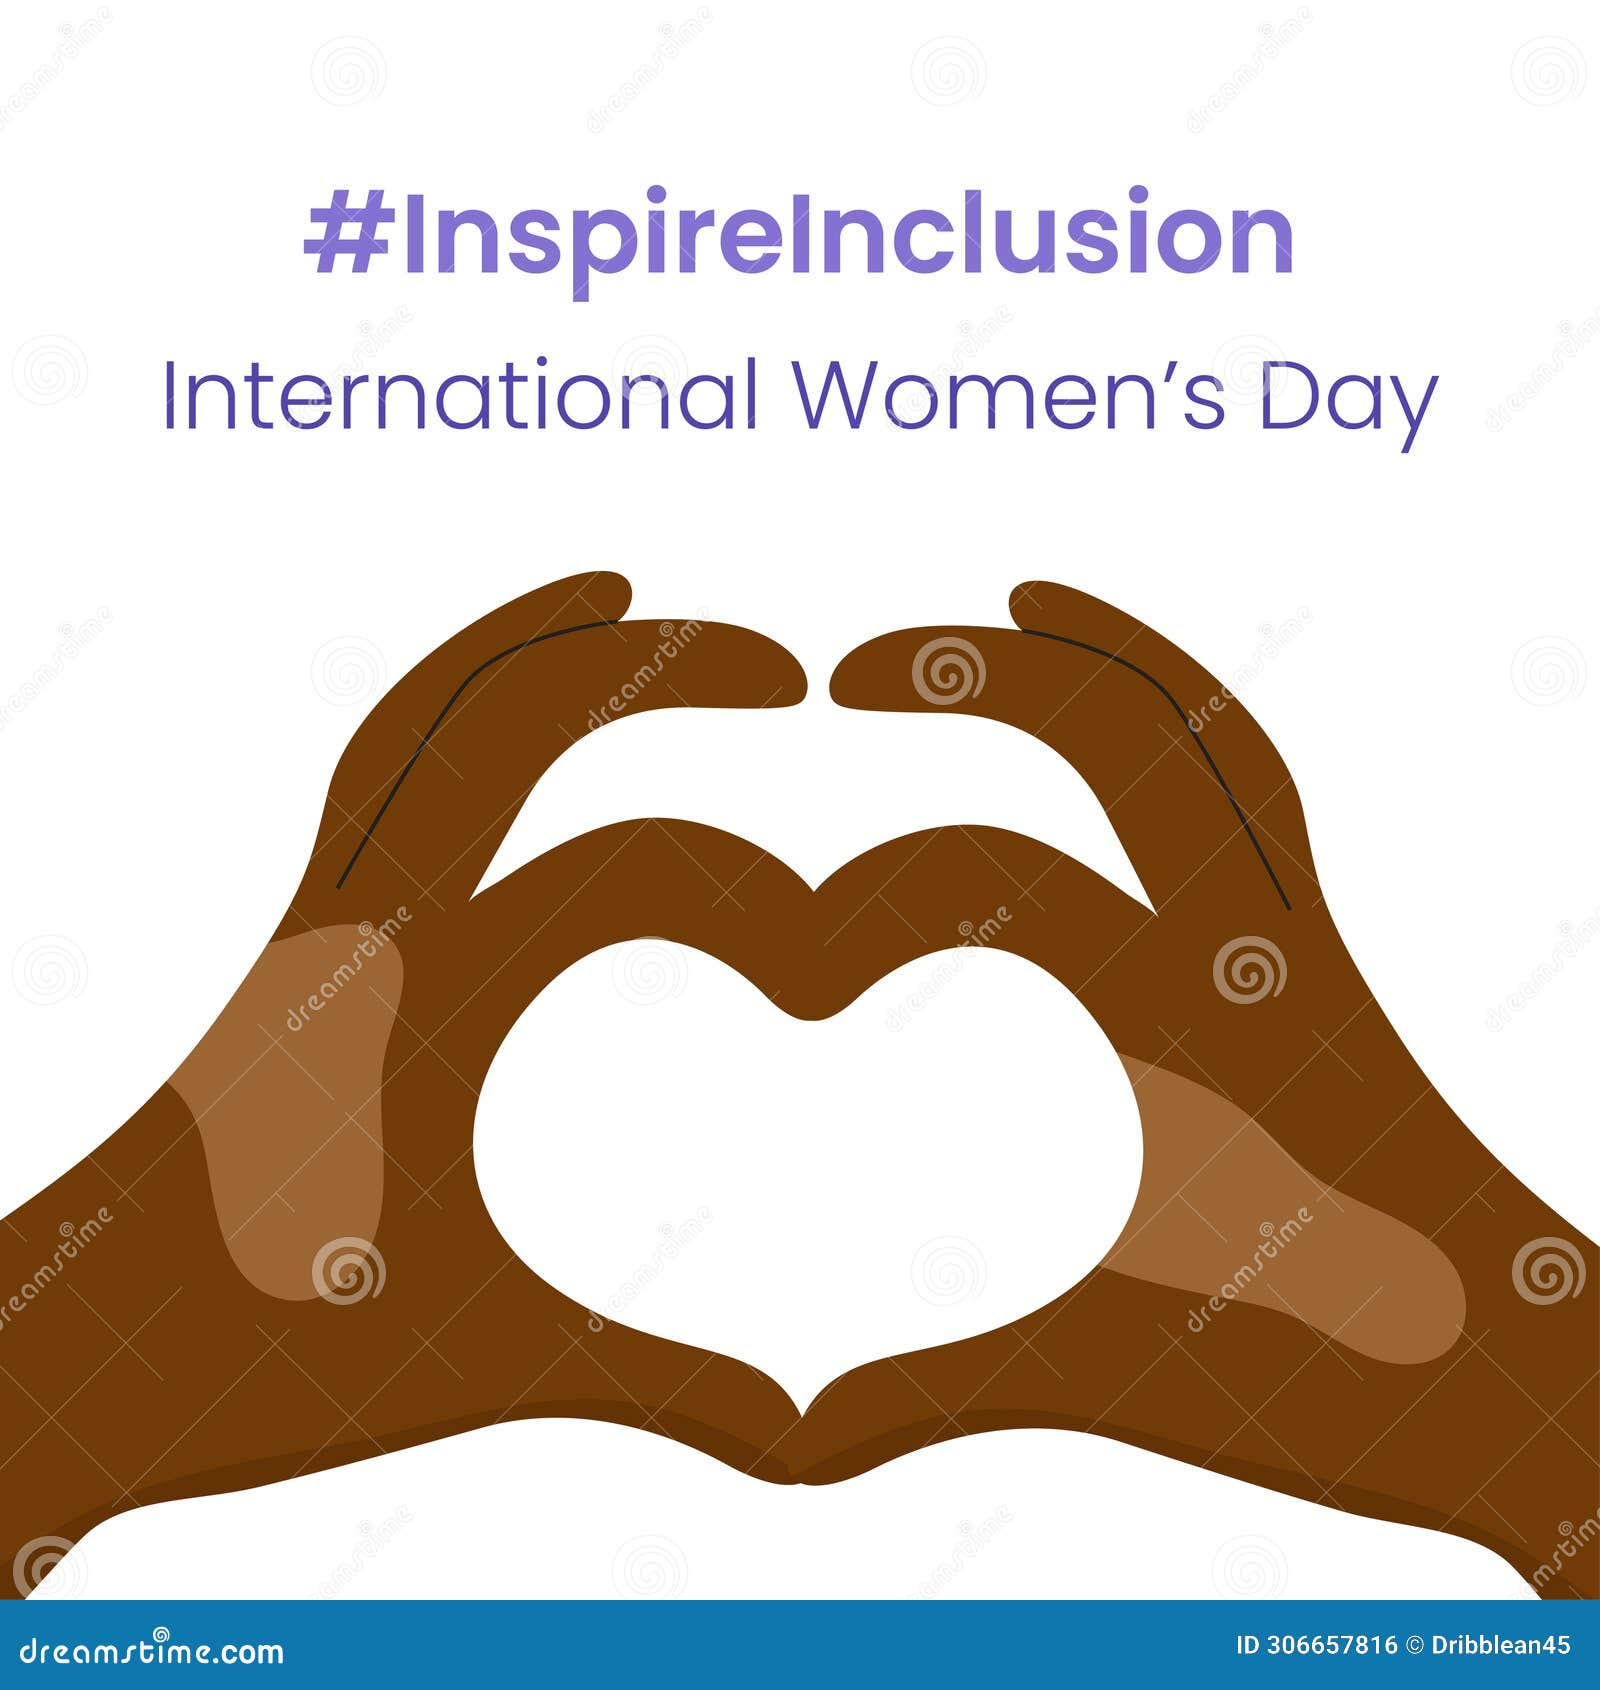 inspire inclusion slogan international women's day 8 march 2024. iwd world campaign.  woman's hands on